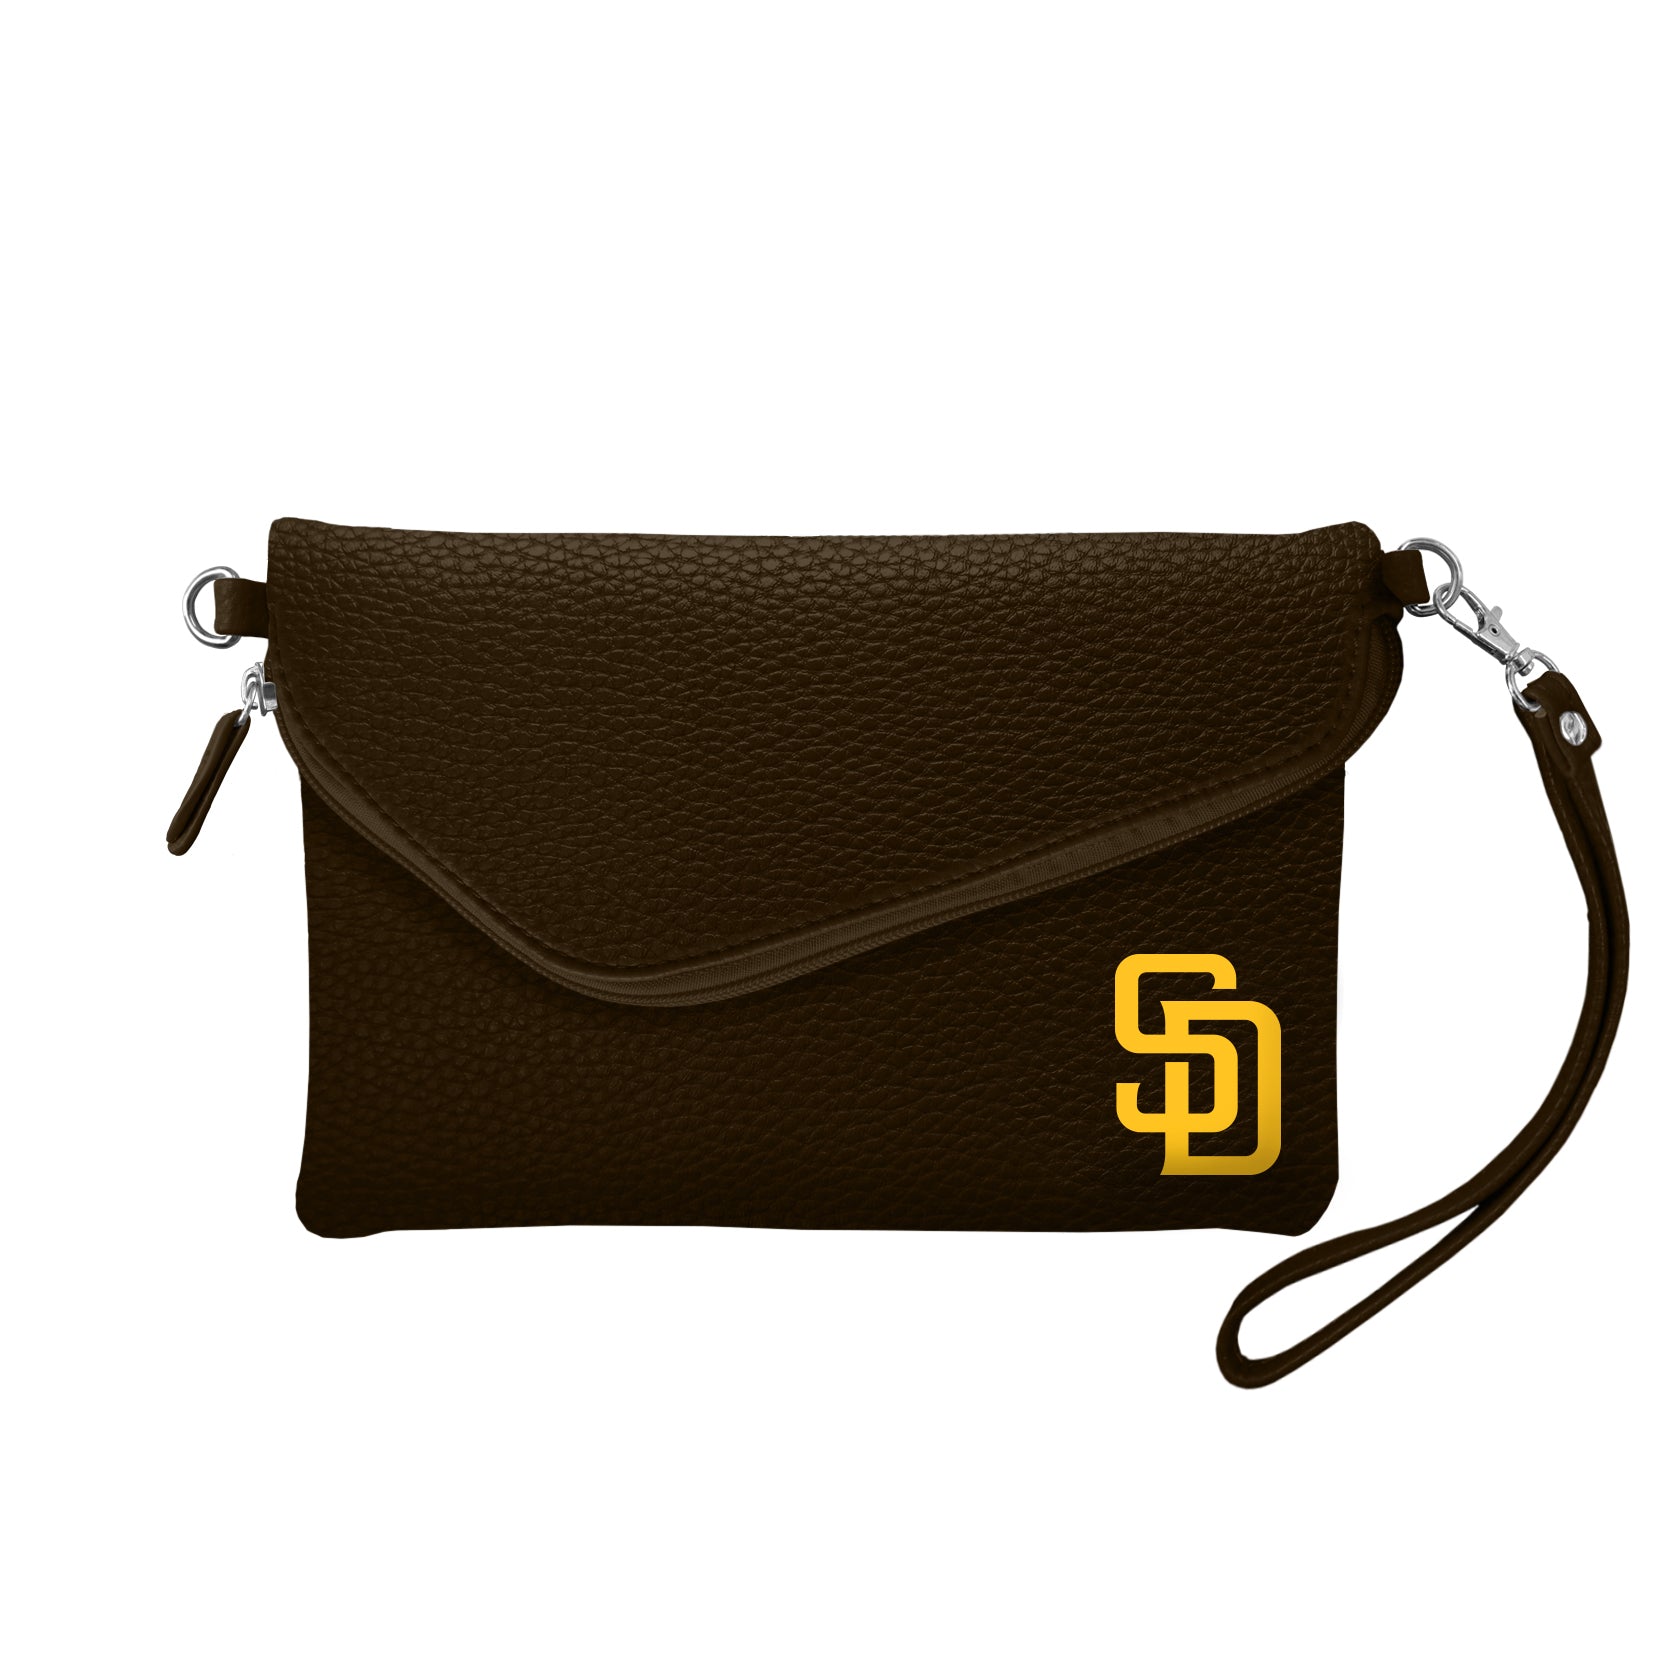 Officially Licensed MLB Pebble Smart Purse - San Diego Padres